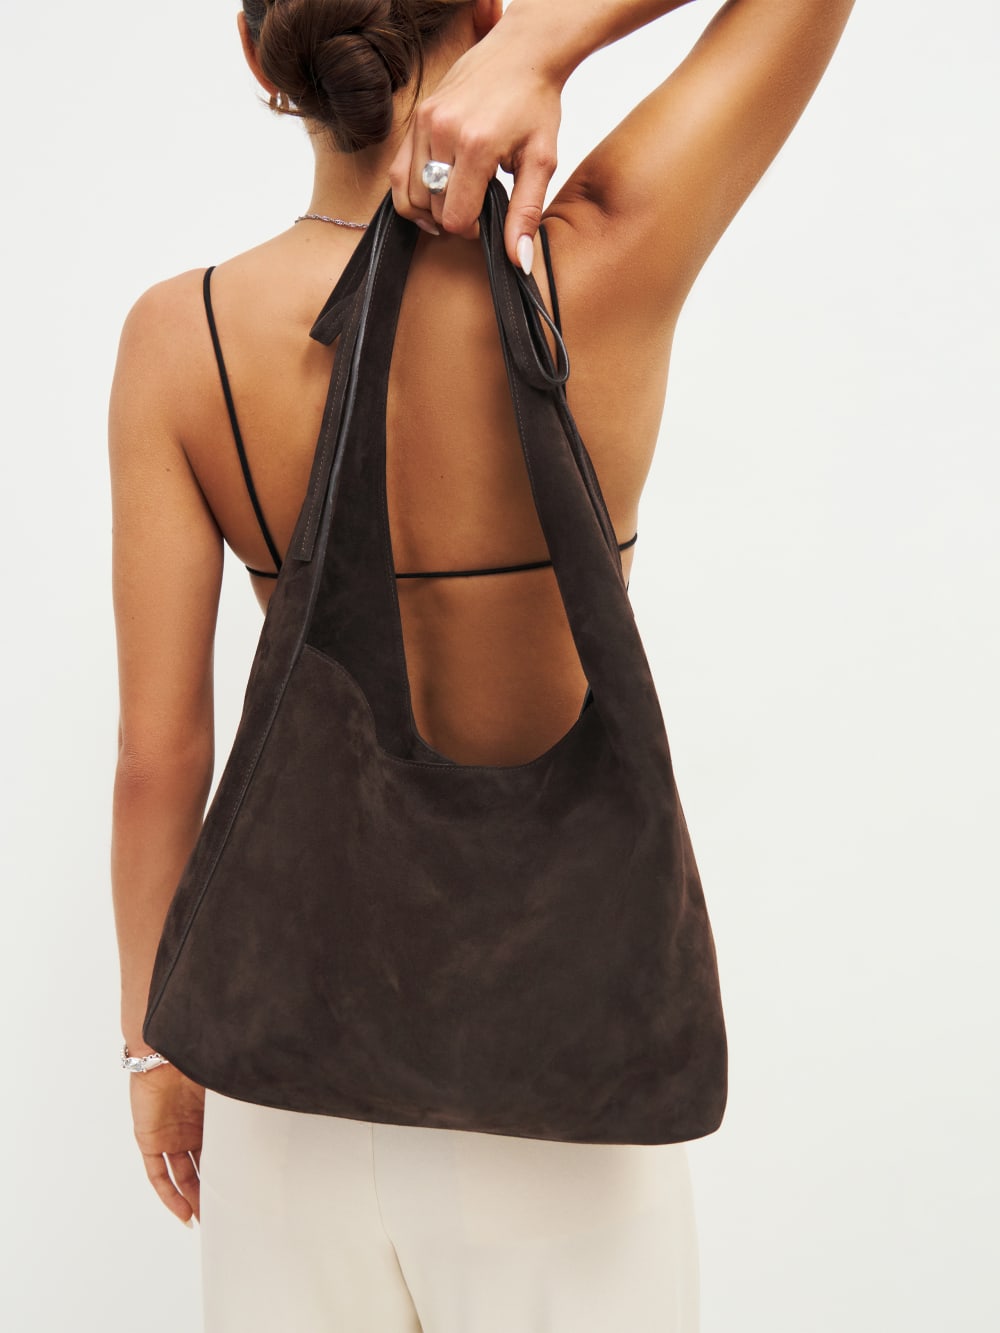 Reformation slouchy brown suede leather tote with a magnetic closure, features a decorative tie detail, and inside zip pocket with a card holder.